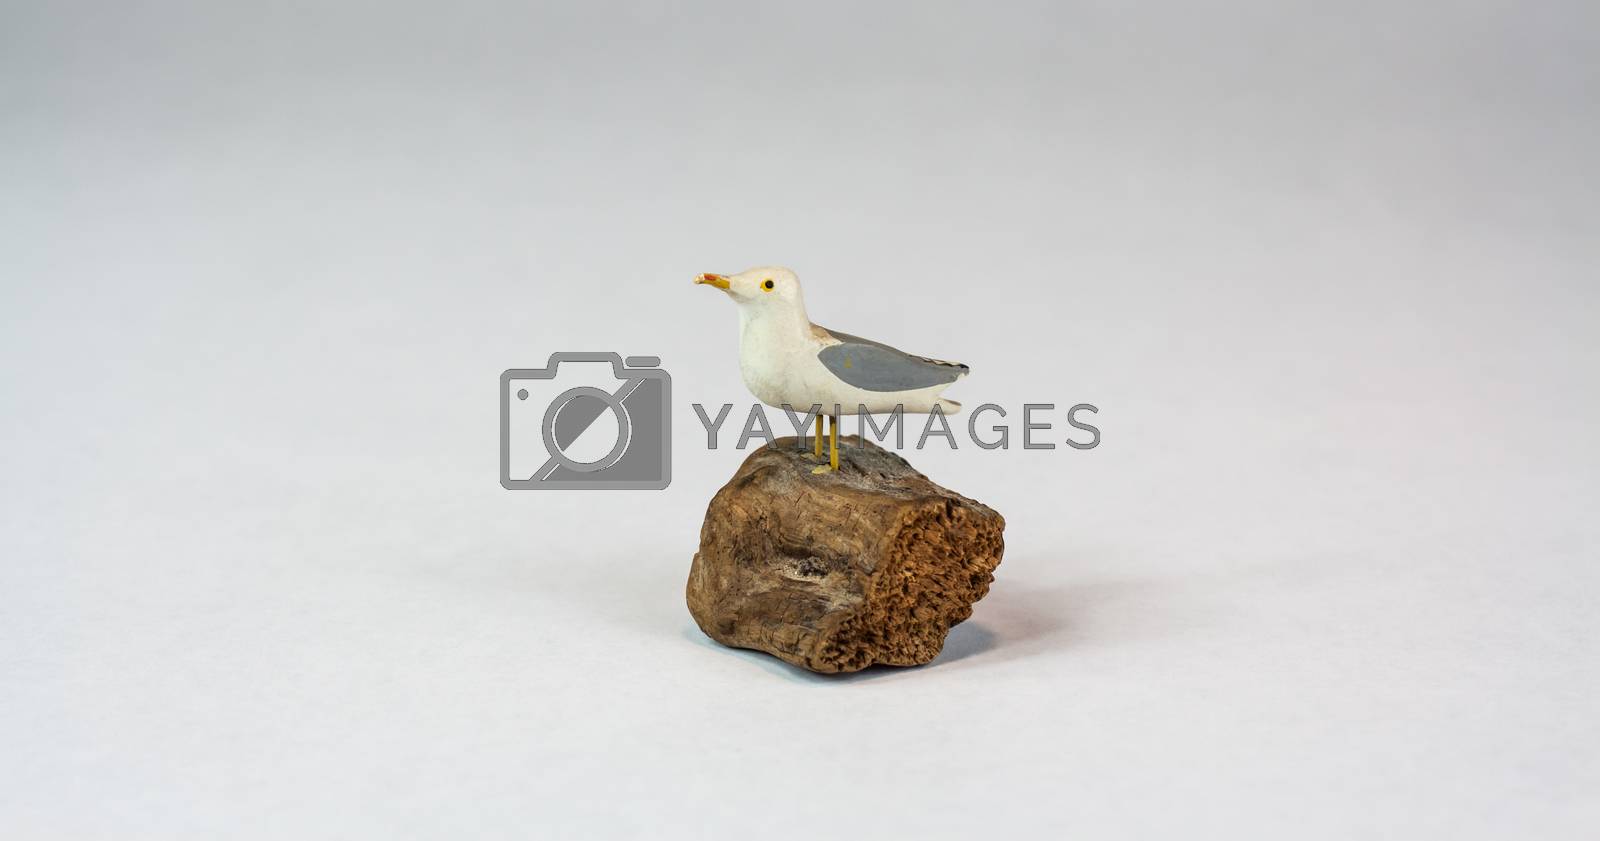 Royalty free image of wooden sea gull statue by TravisPhotoWorks